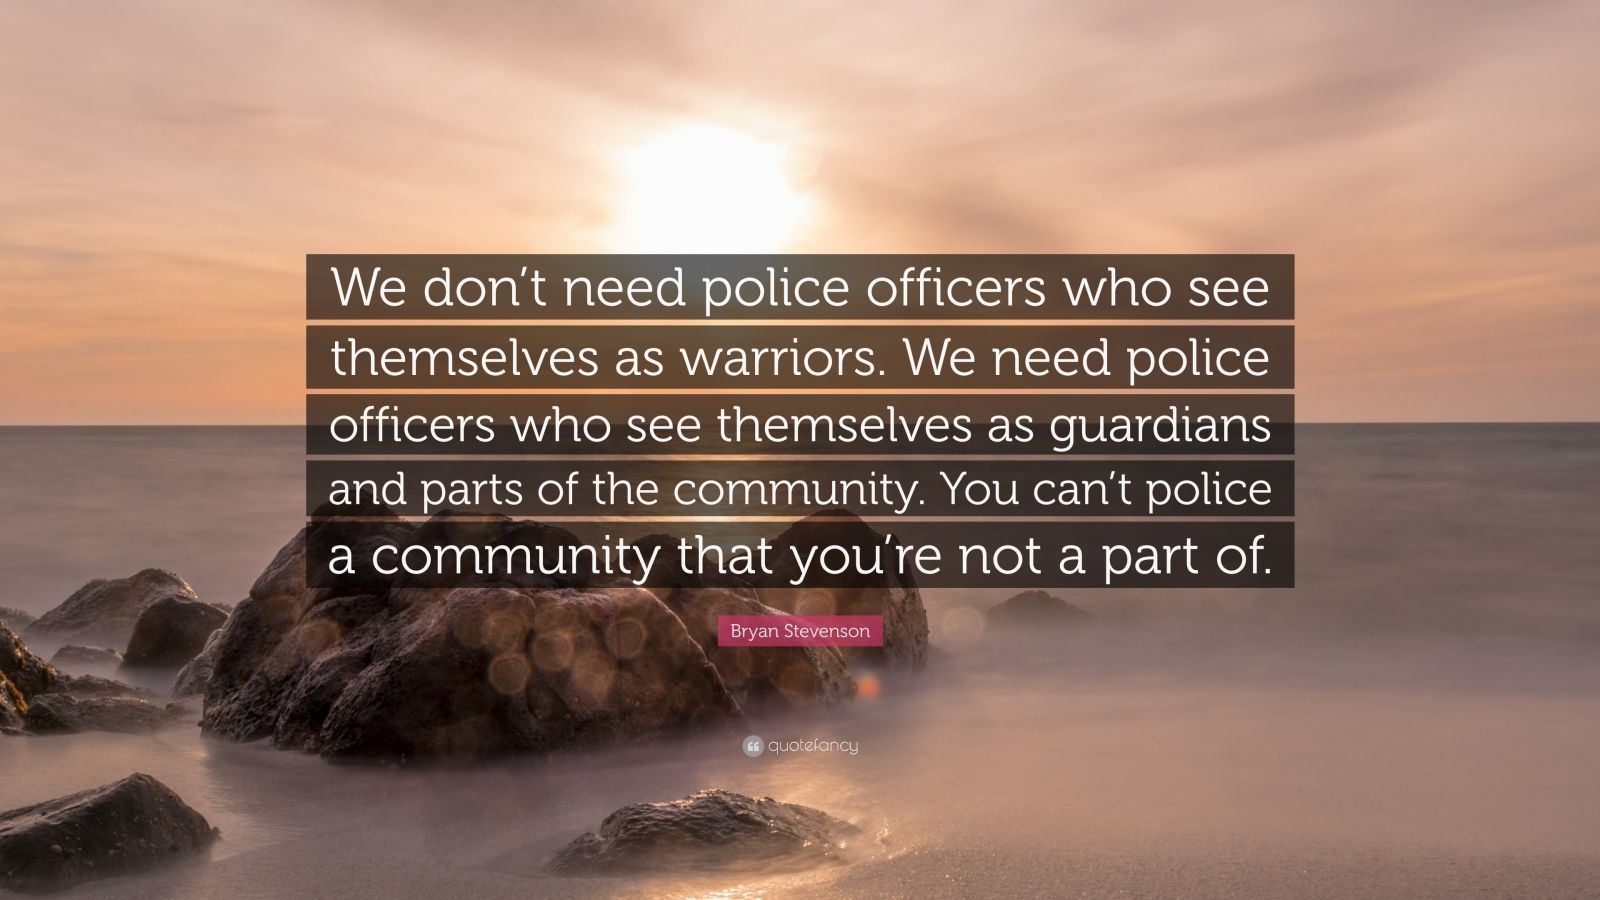 Bryan Stevenson Quote: “We don’t need police officers who see